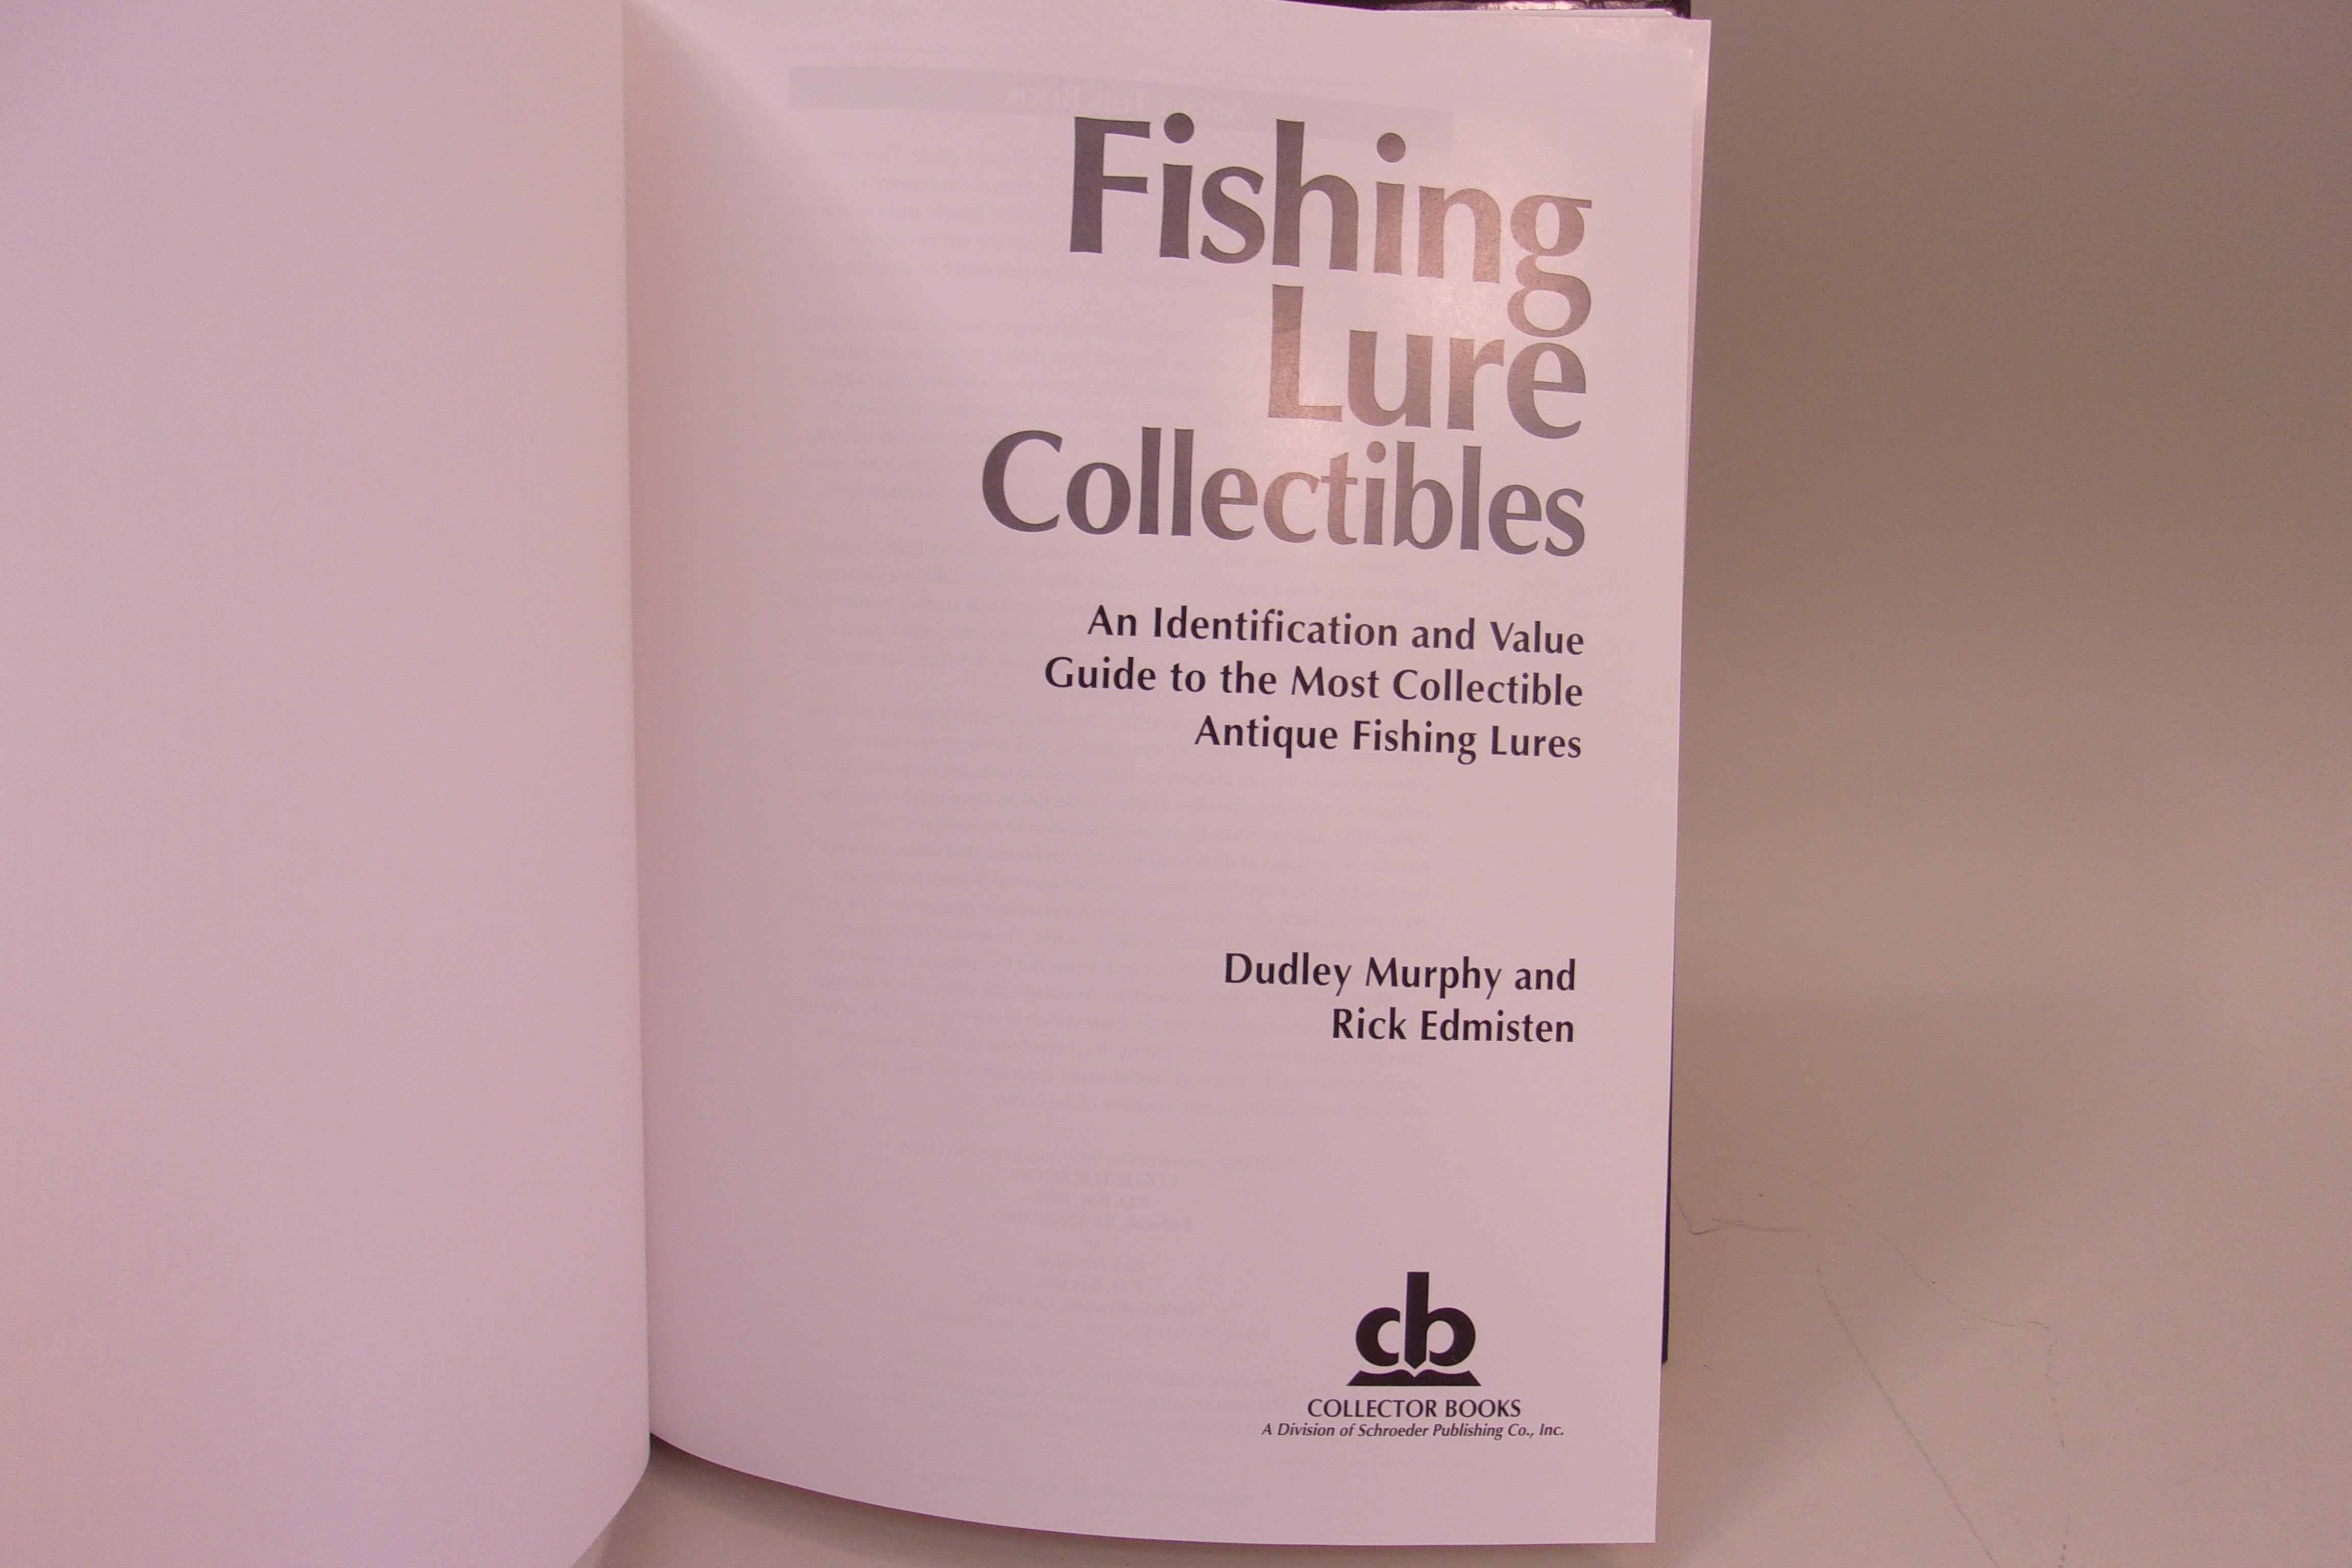 Fishing Lure Collectibles, Vol. 1: An Identification and Value Guide to the  Most Collectible Antique Fishing Lures (Fishing Lure Collectibles, 2nd Ed):  Dudley Murphy: 9781574321968: : Books